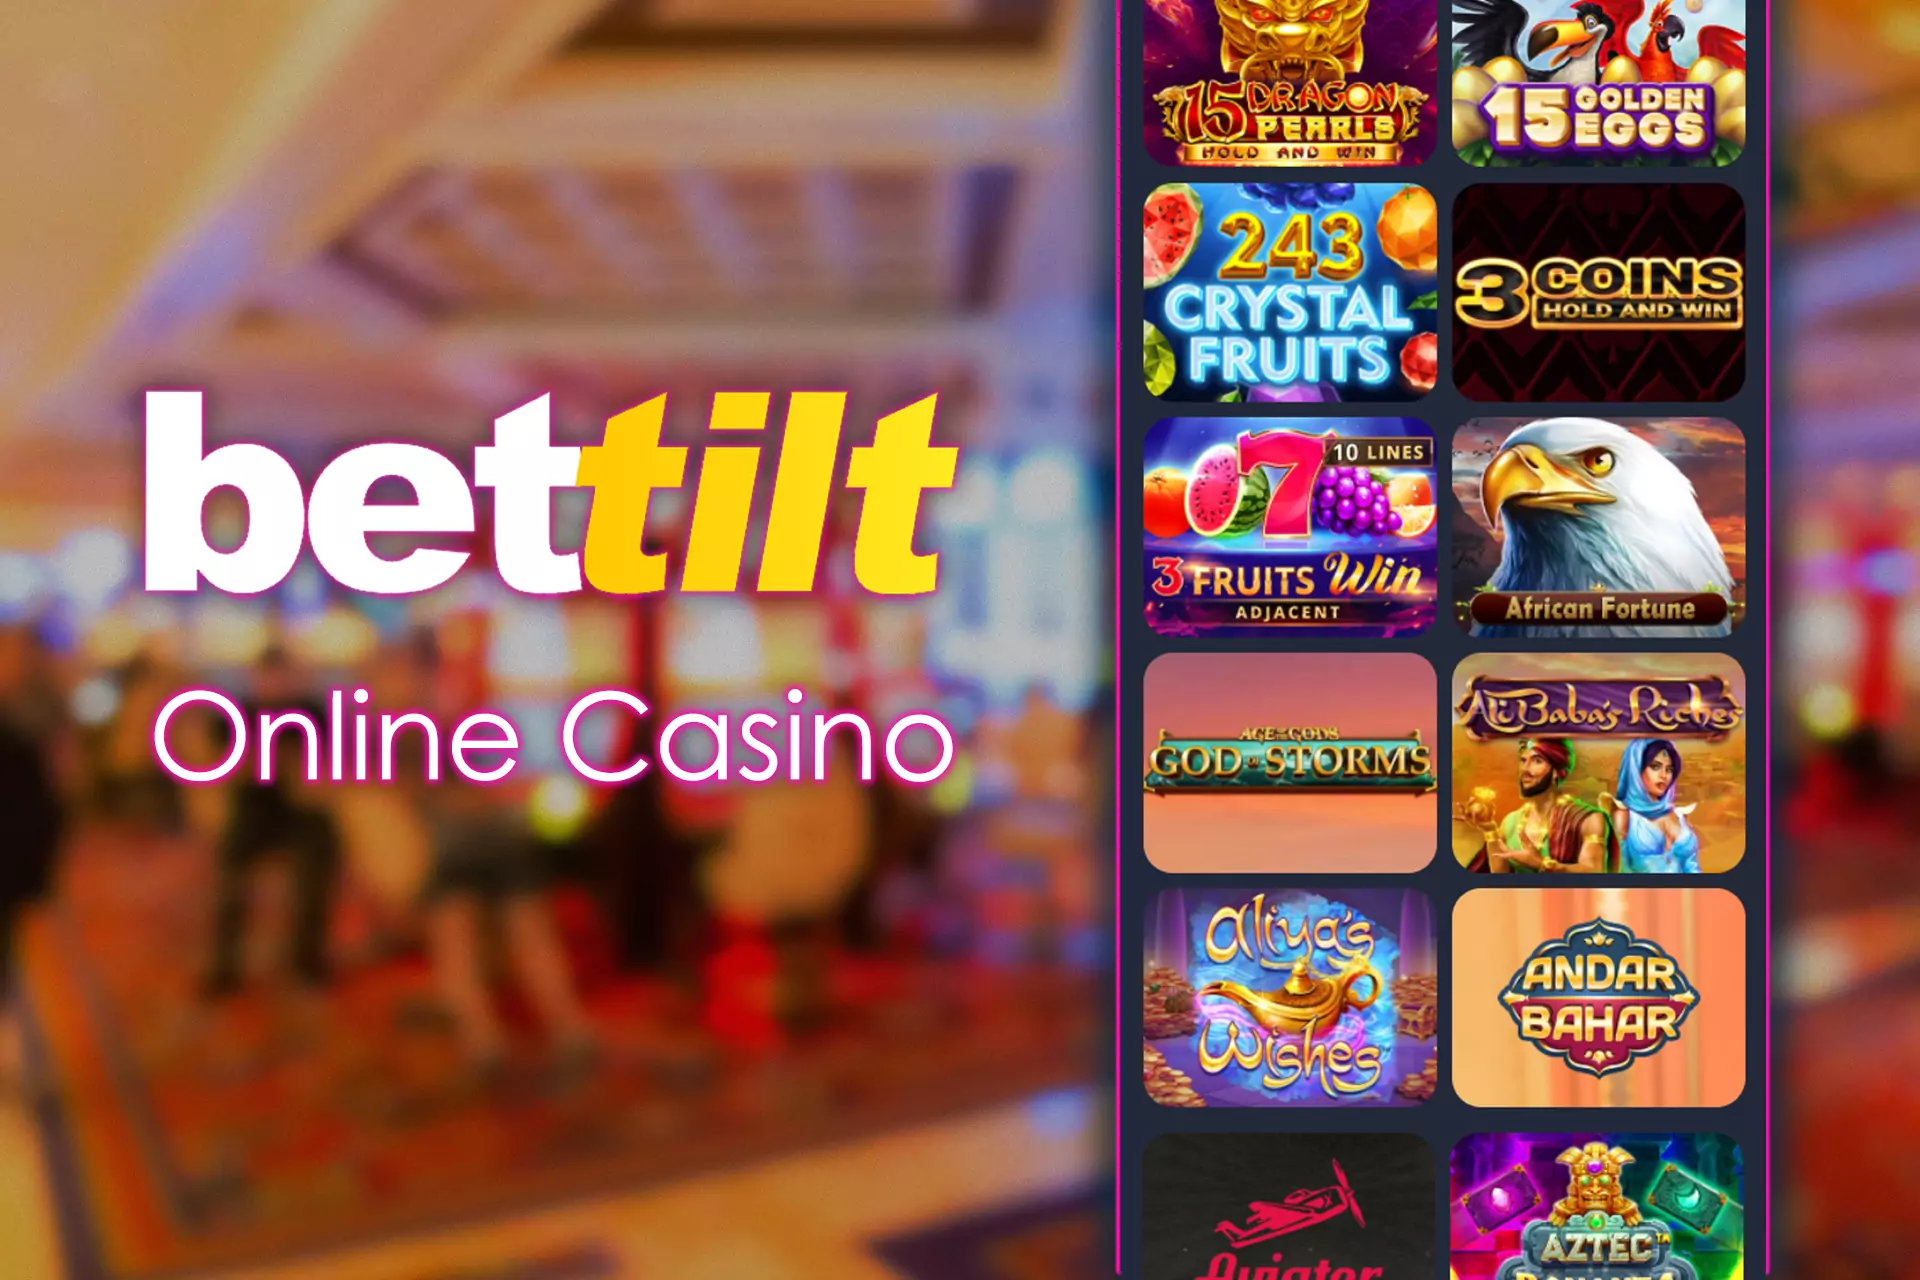 Between matches, you can play some games or slots in the online casino.